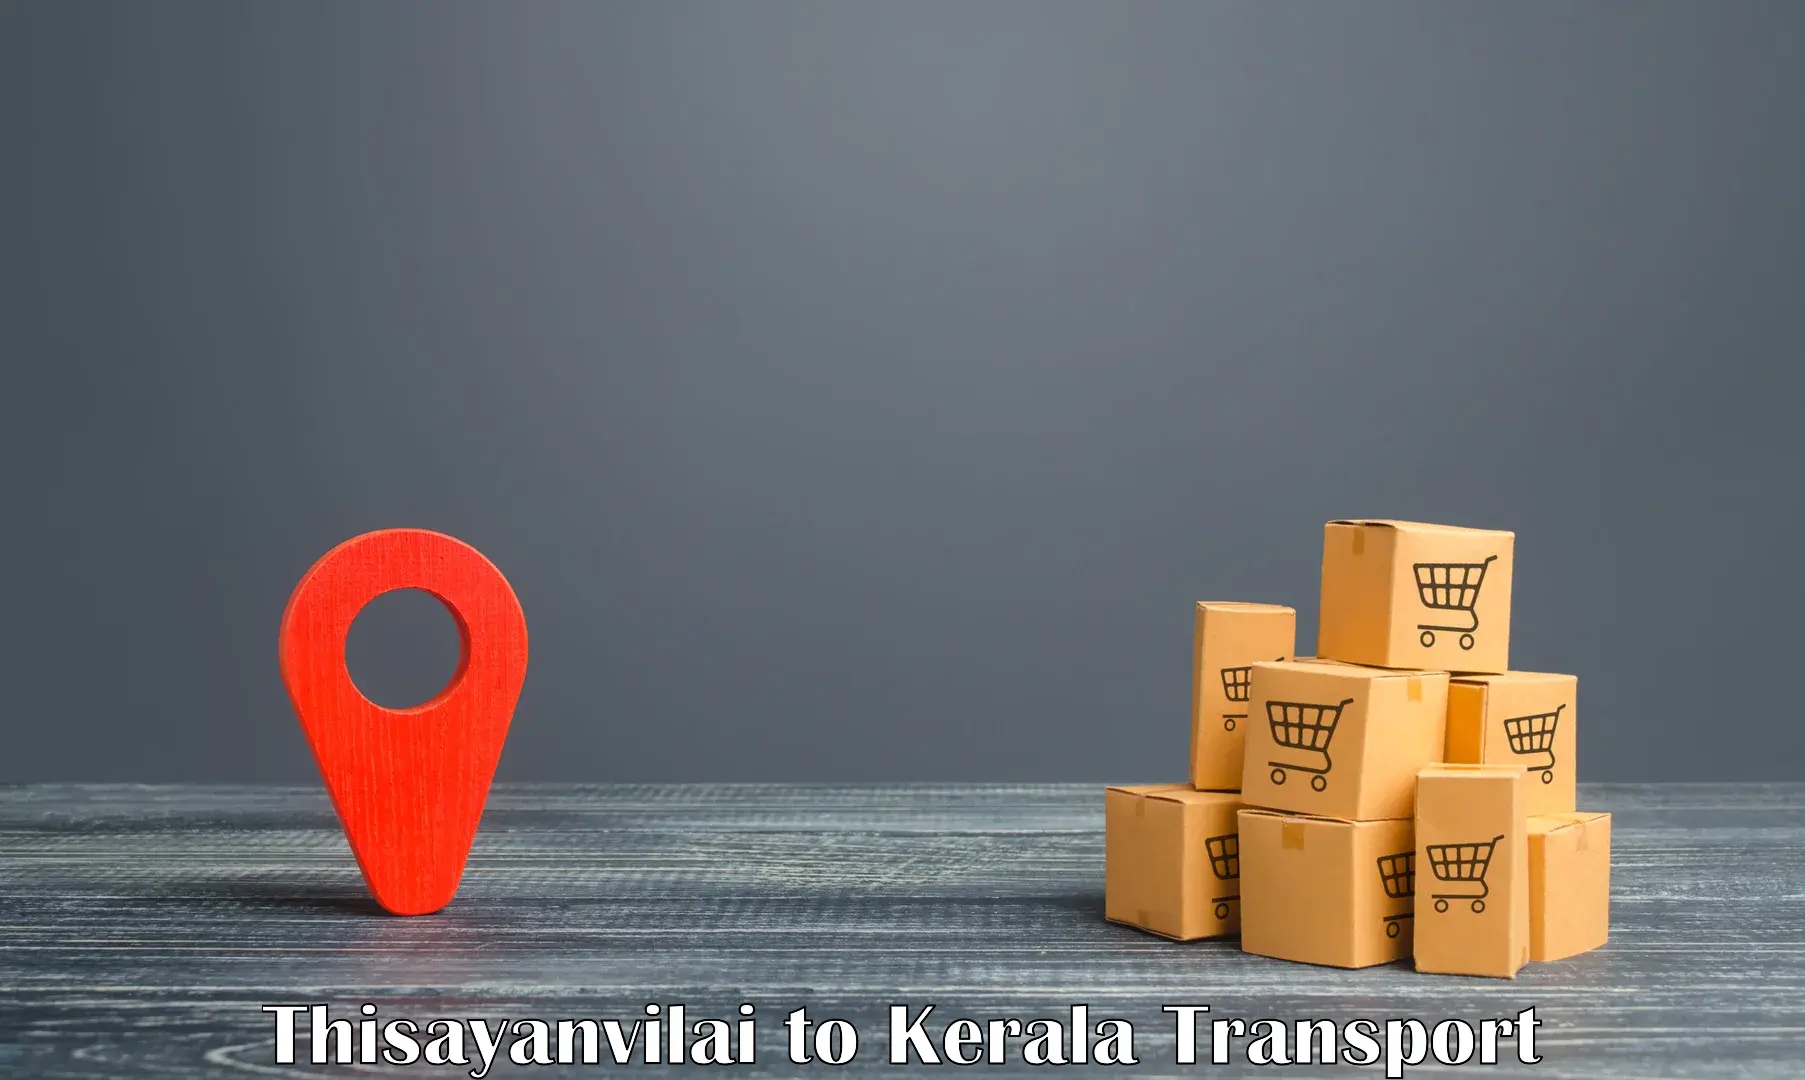 Container transport service Thisayanvilai to Chervathur